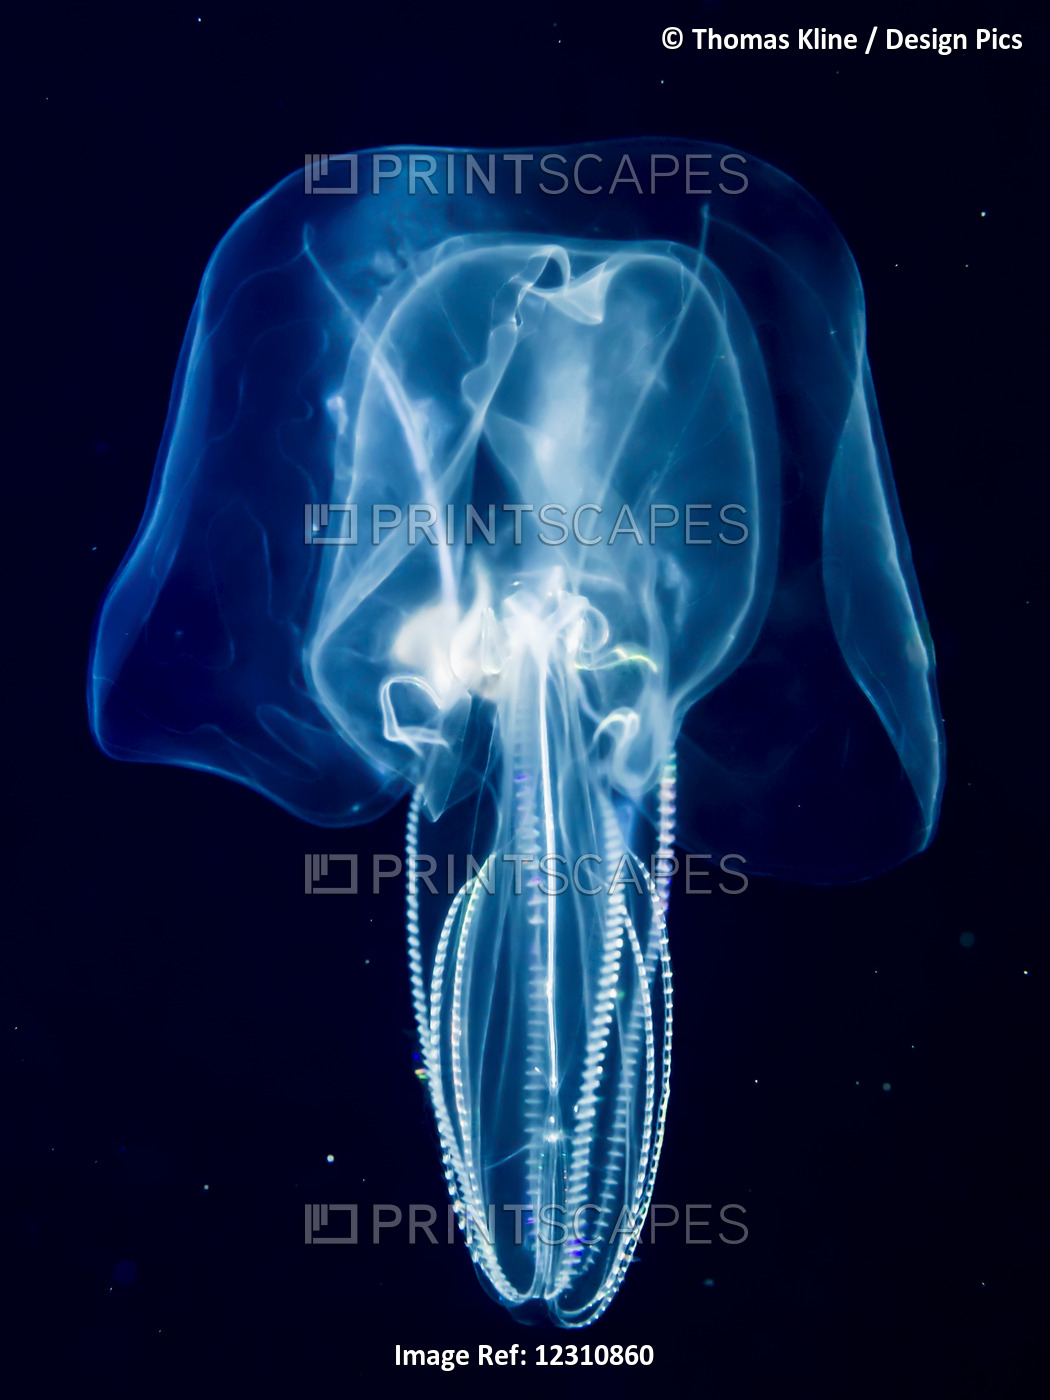 Bolinopsid Comb Jelly (Ctenophore) That Was Photographed Several Miles Offshore ...